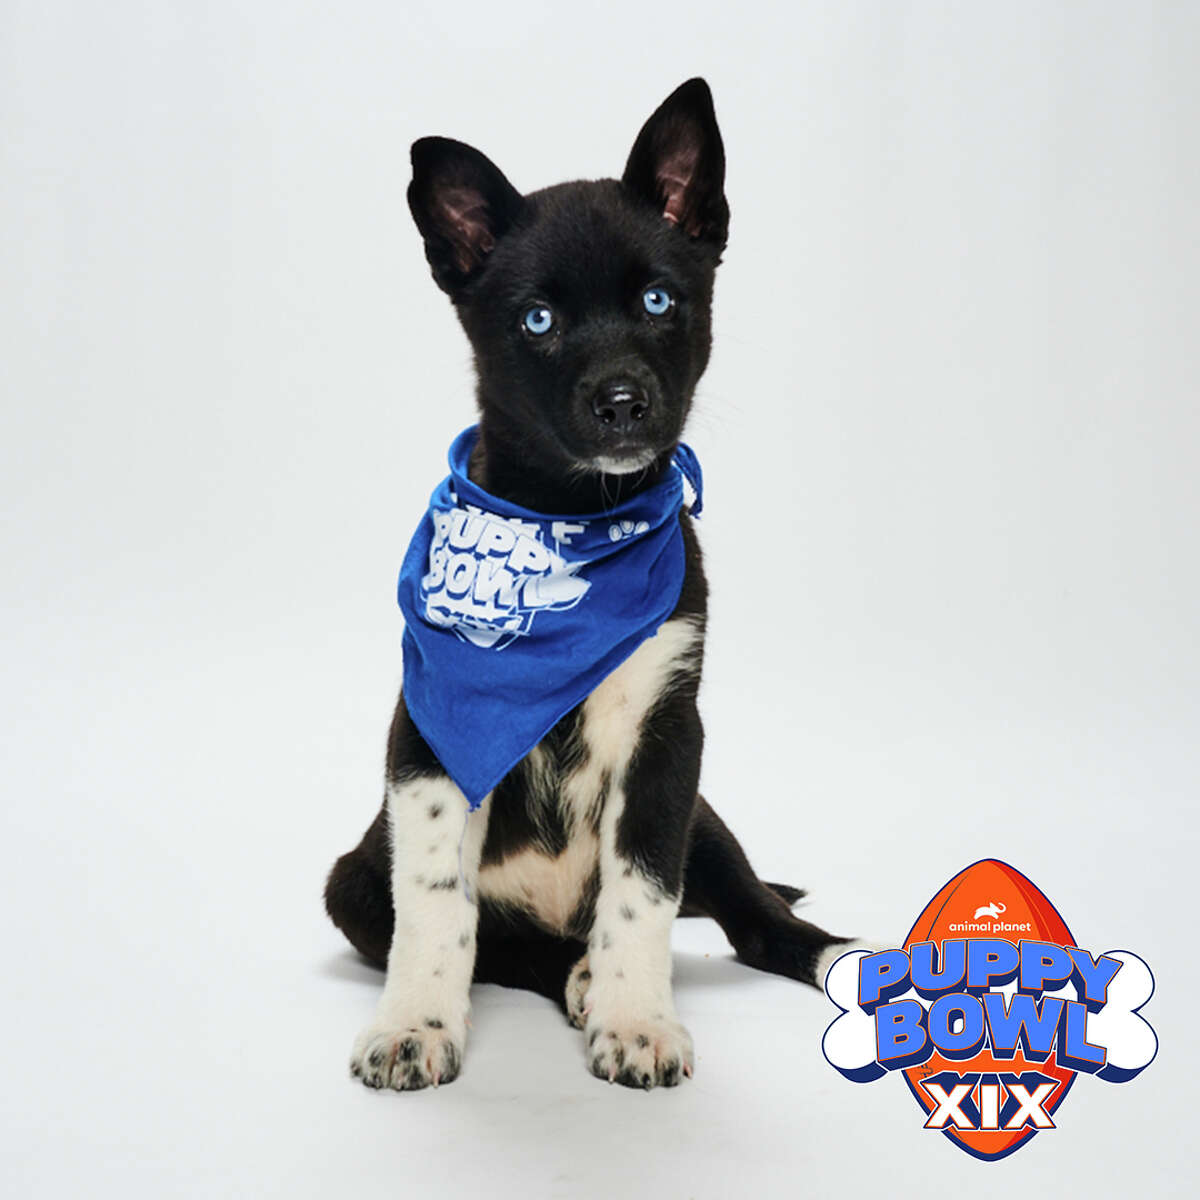 Twinkle from the Lucky Dog Refuge will play in this year's Puppy Bowl on Sunday, Feb. 12.